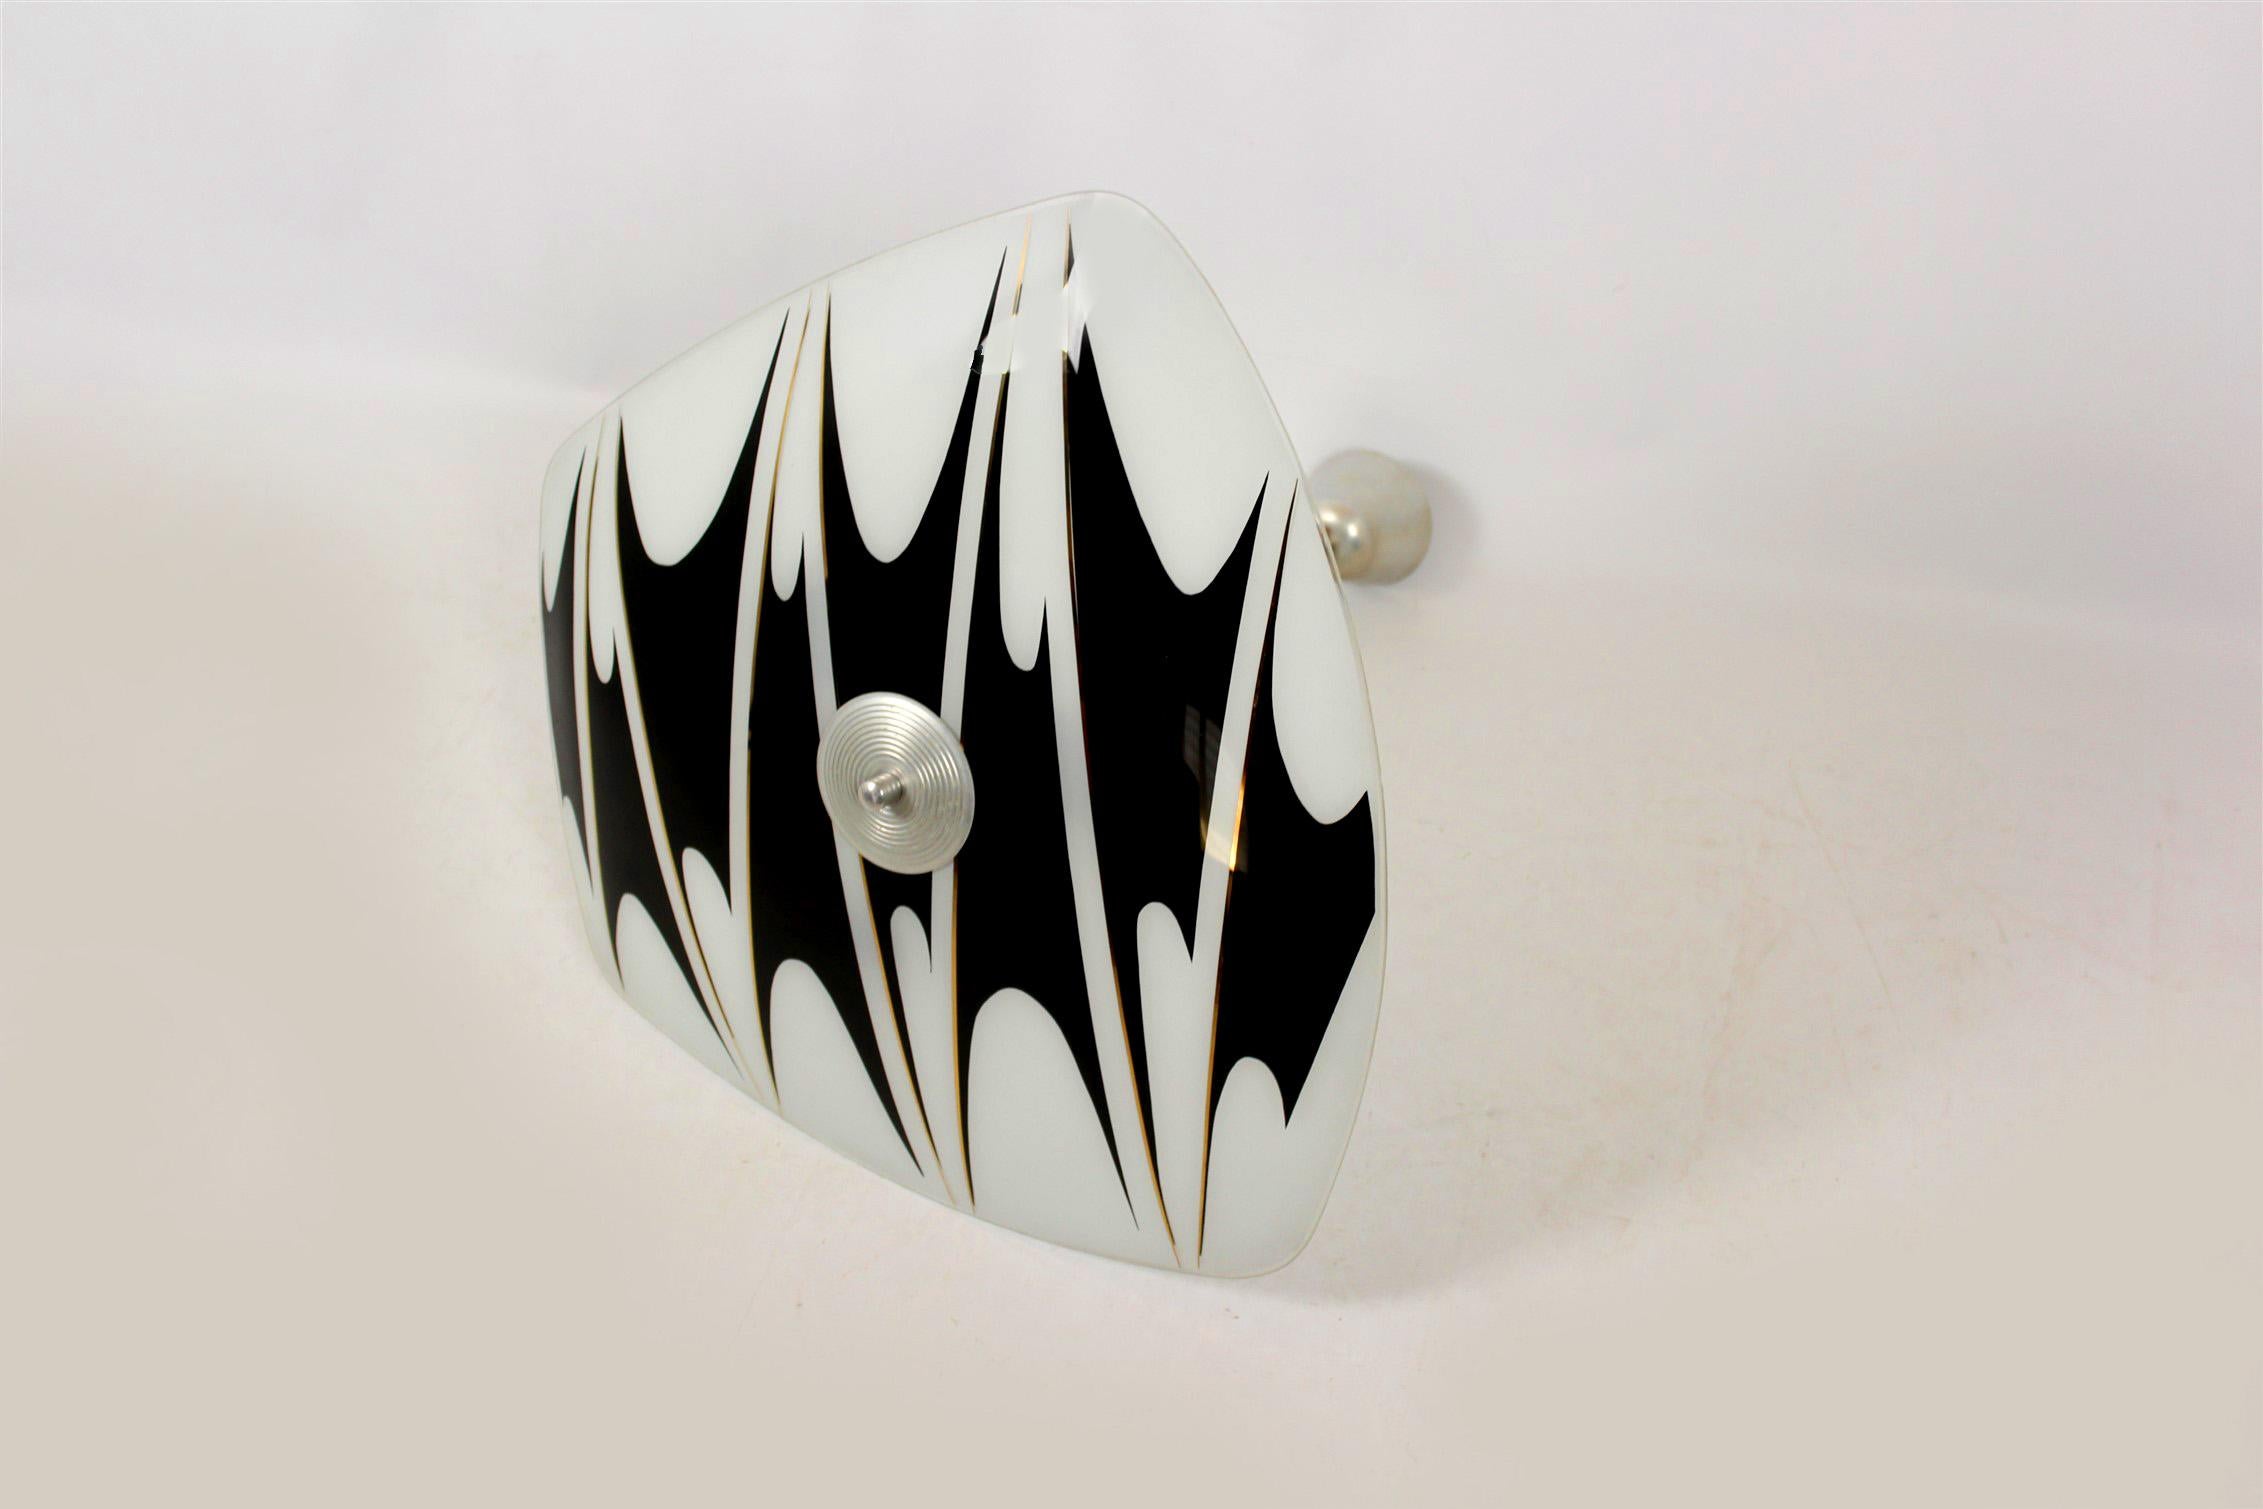 Beautiful ceiling light dating from the 1950s or 1960s. Made in former Czechoslovakia by Napako. Features a patterned glass shade. The lamp is fully functional and requires three E27 bulbs.